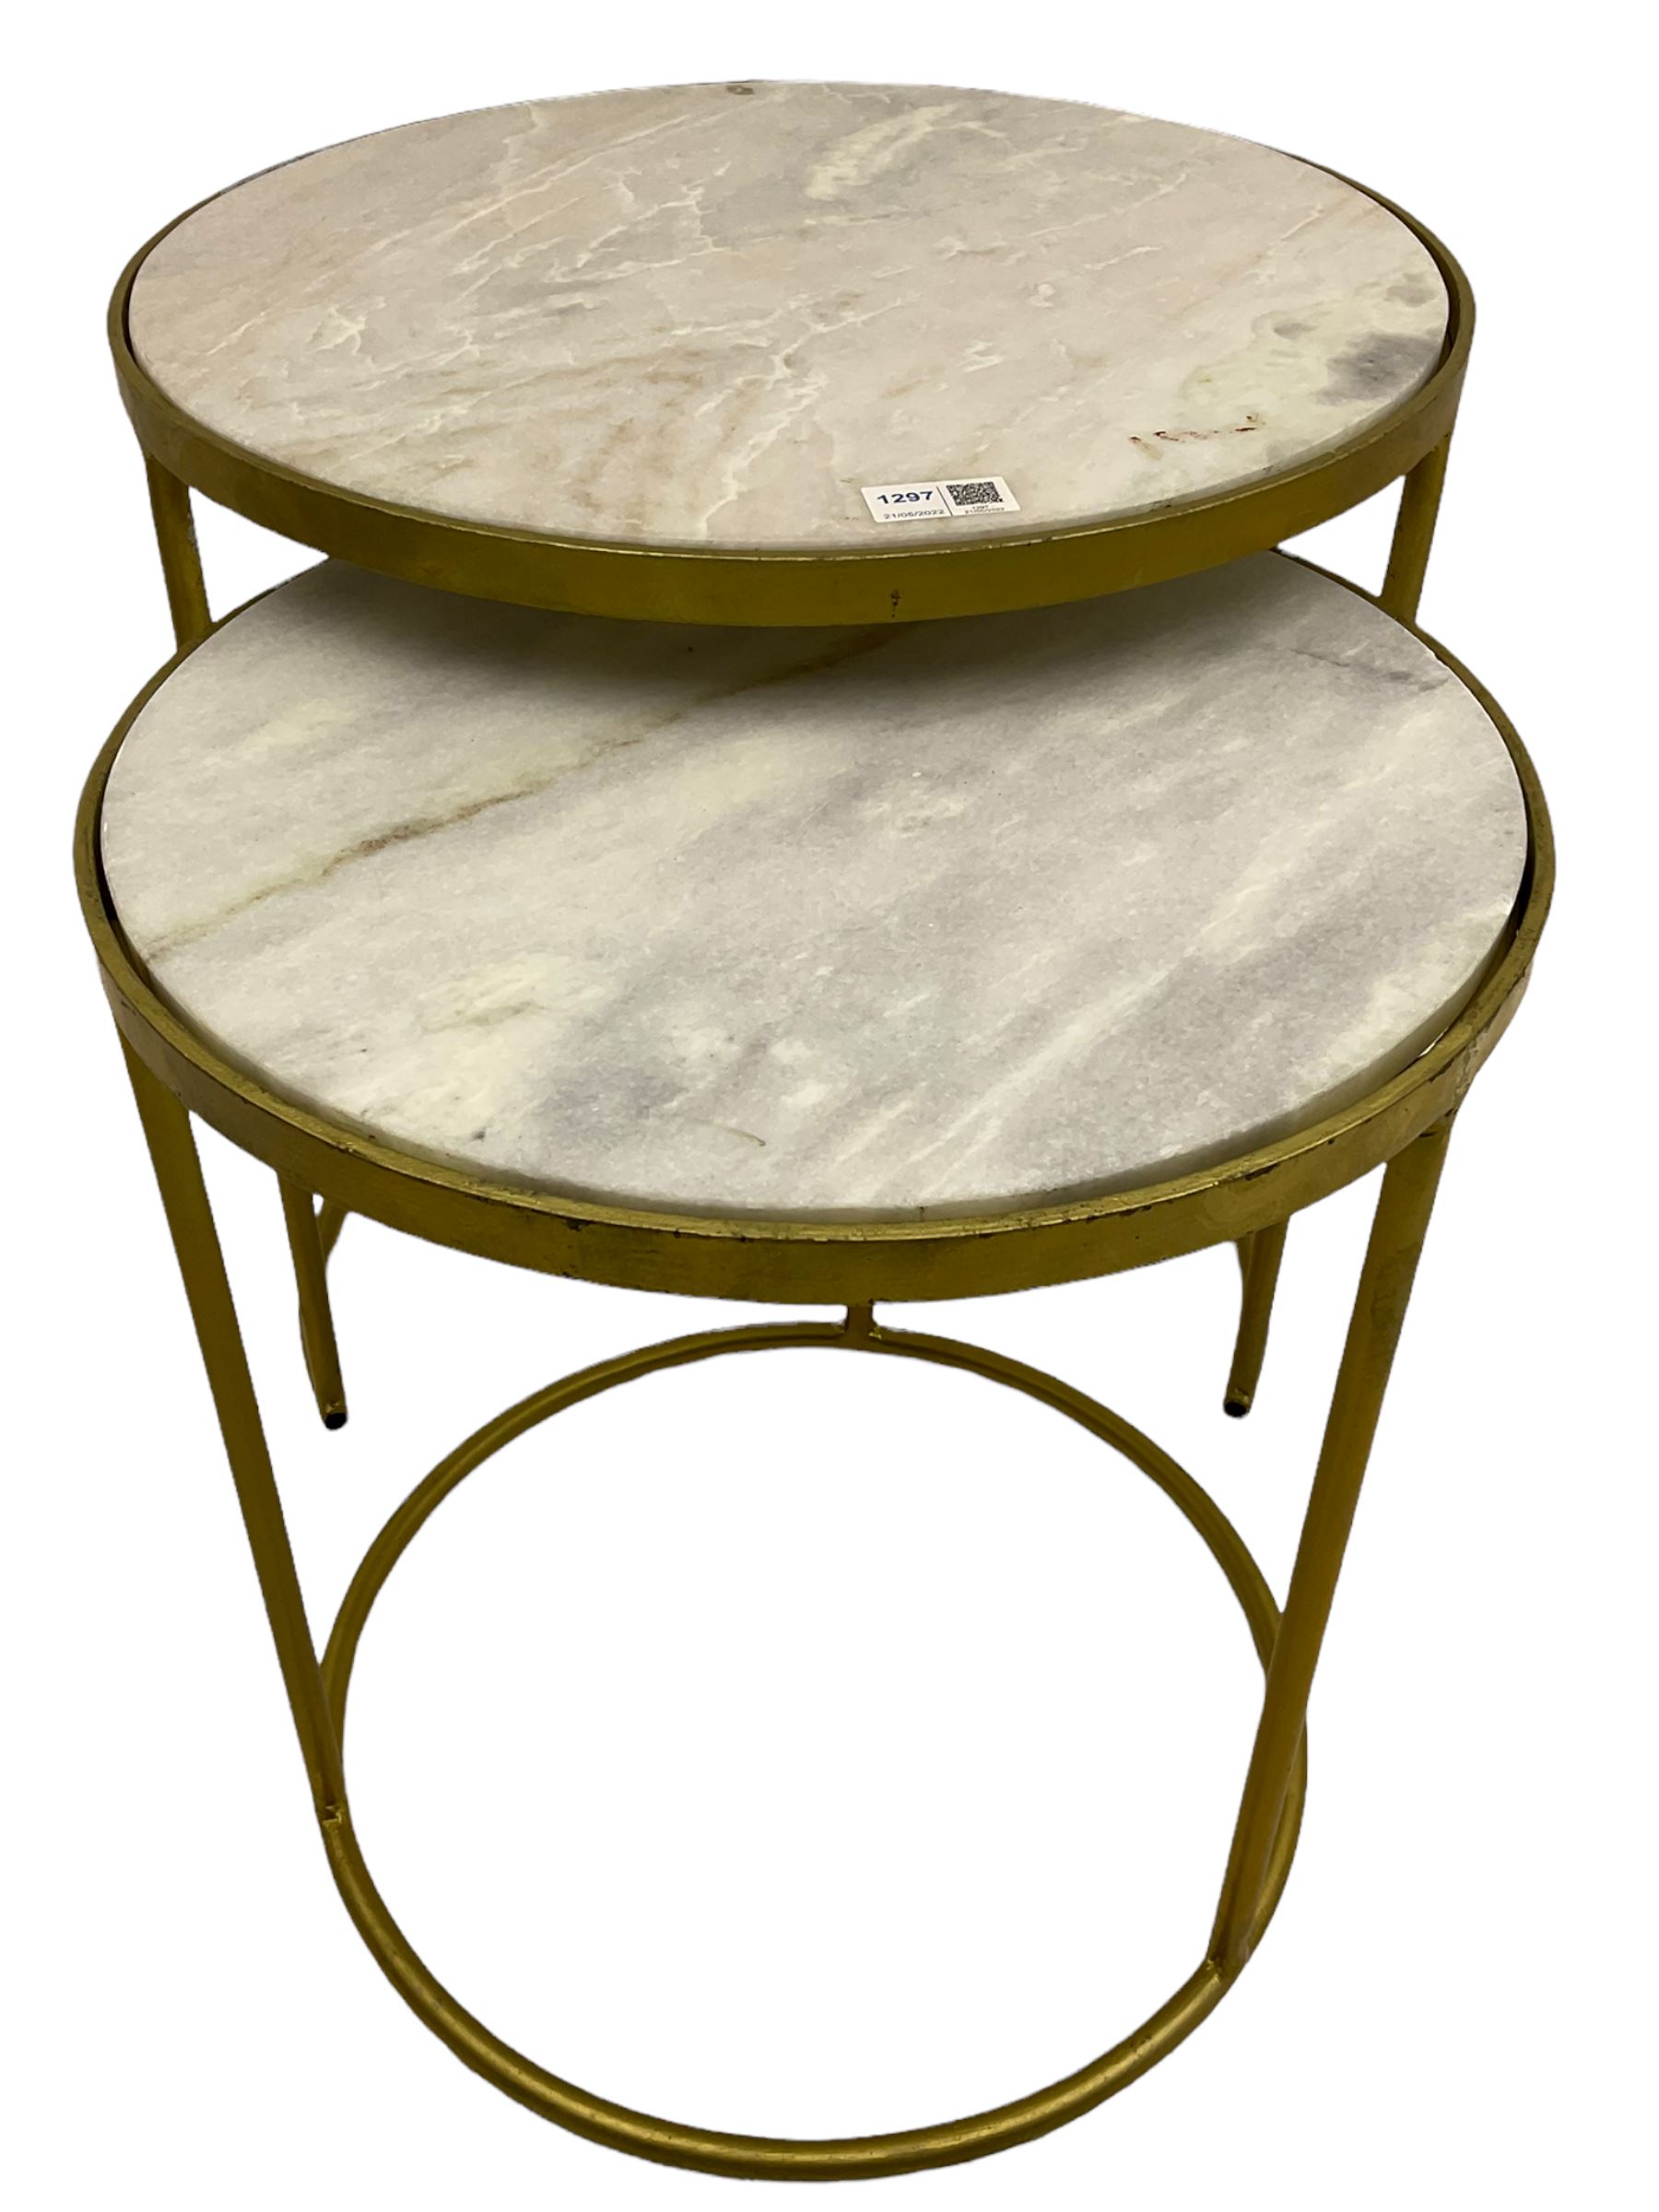 Two contemporary nesting side tables